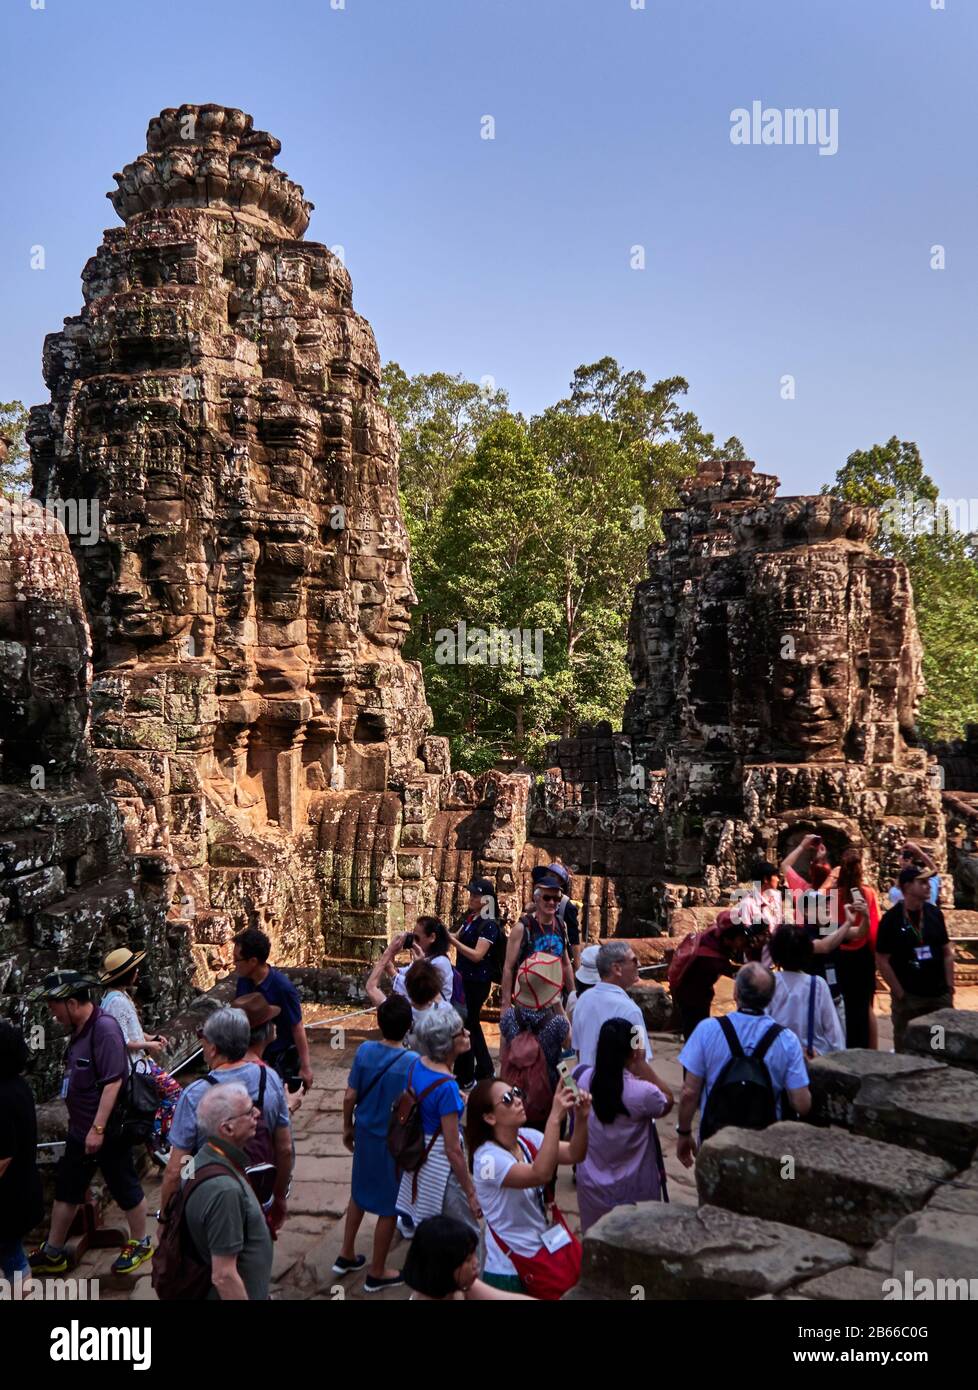 pink sandstone,The magnificent Bayon Temple situated within the last capital city of the Khmer Empire - Angkor Thom. Its 54 gothic towers are decorated with 216 enormous smiling faces. Built in the late 12th or early 13th century as the official state temple of the King Jayavarman VII. Stock Photo